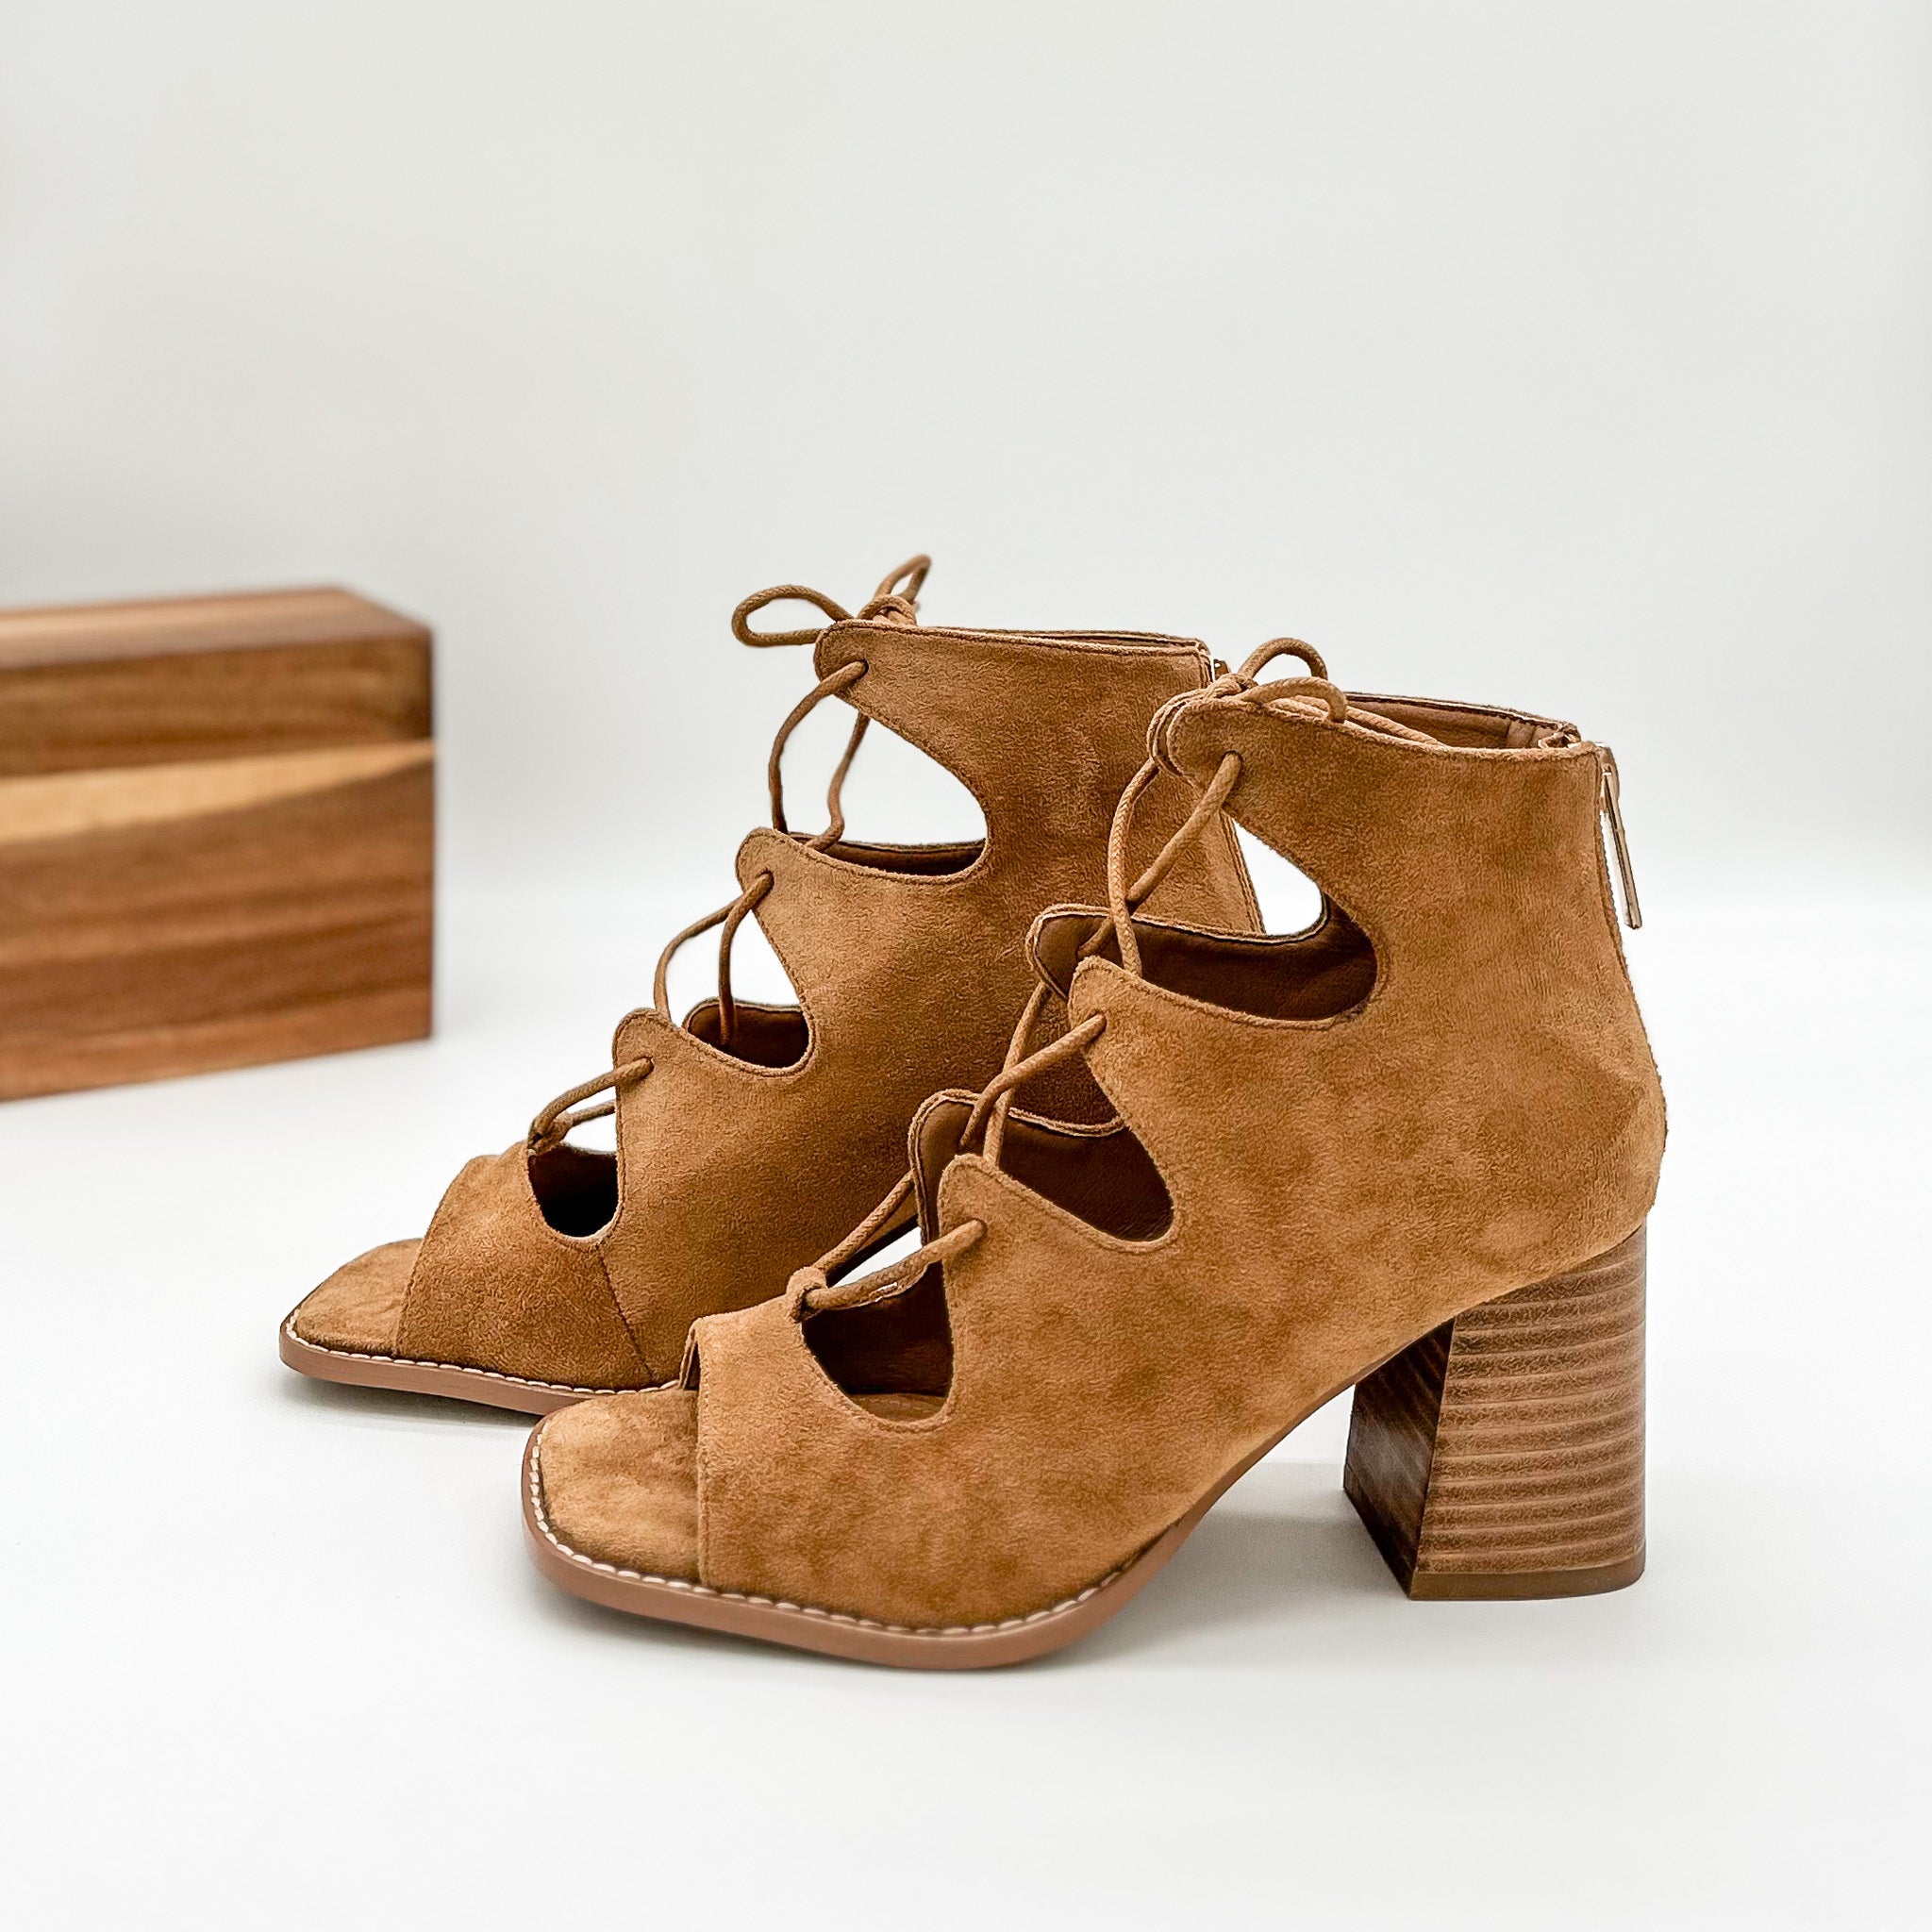 Corkys Wally Heeled Sandal in Camel Suede